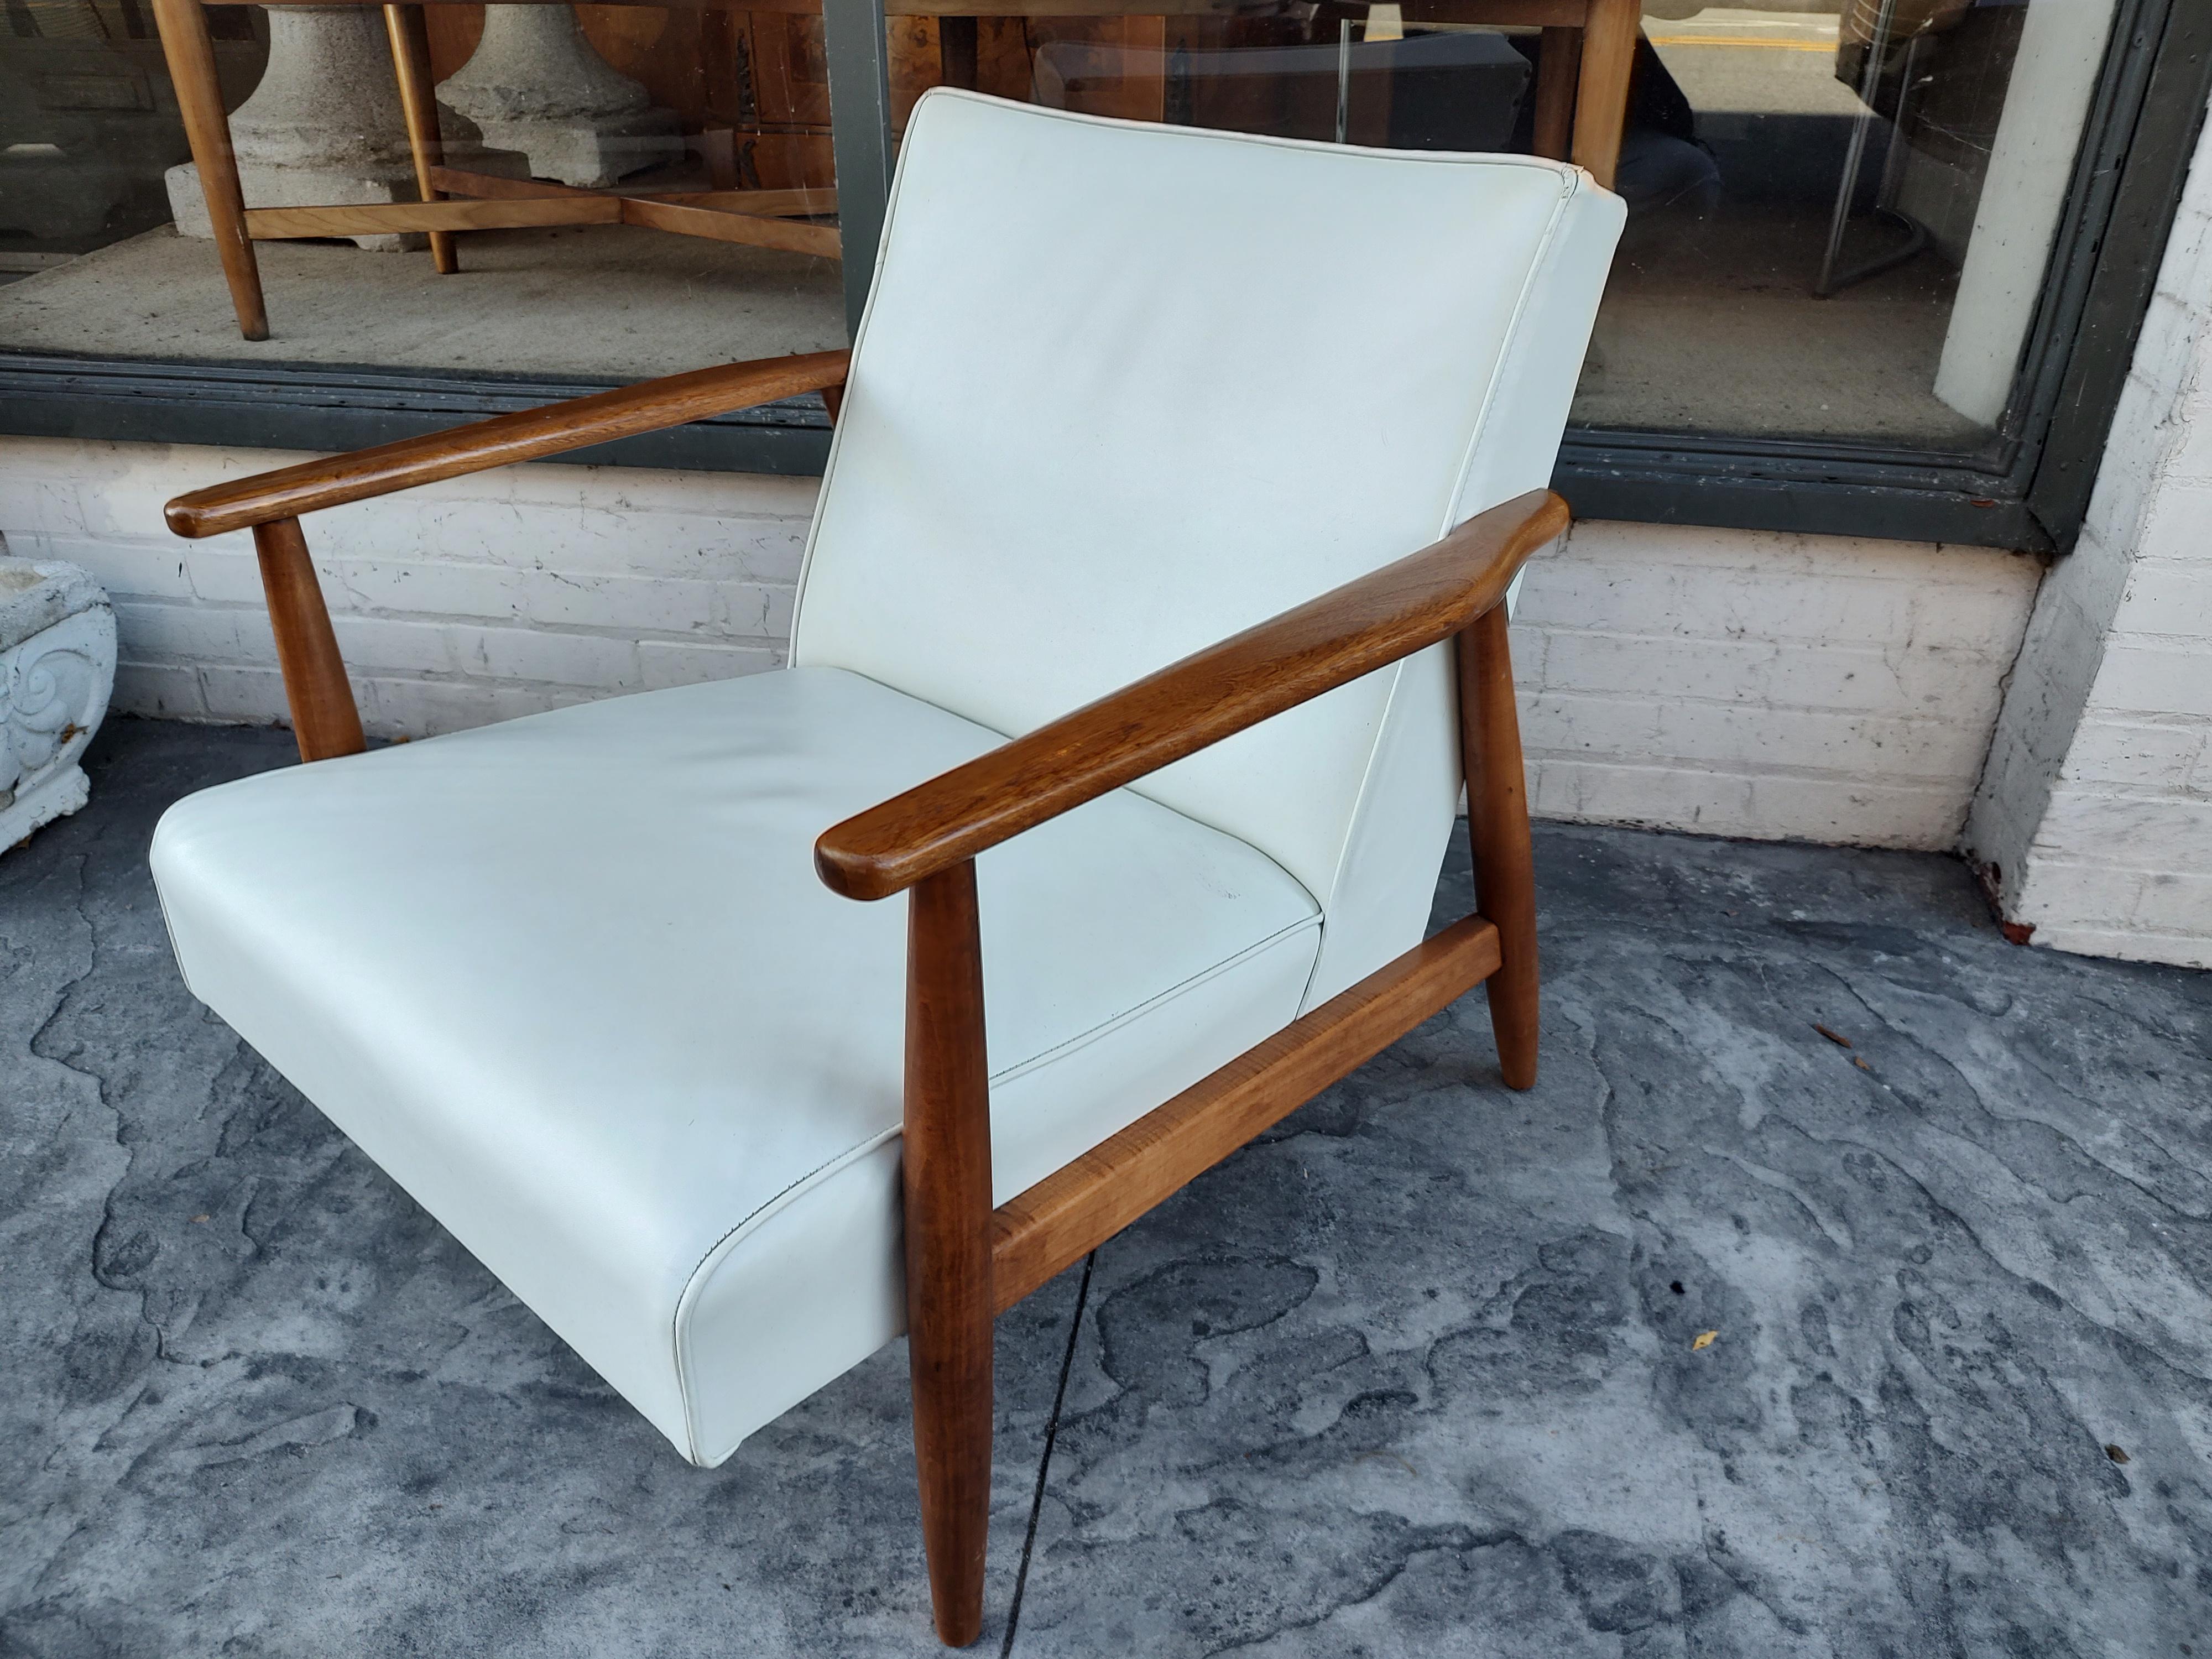 Mid-20th Century Mid-Century Modern Walnut Frame Lounge Chair by Viko Baumritter  For Sale